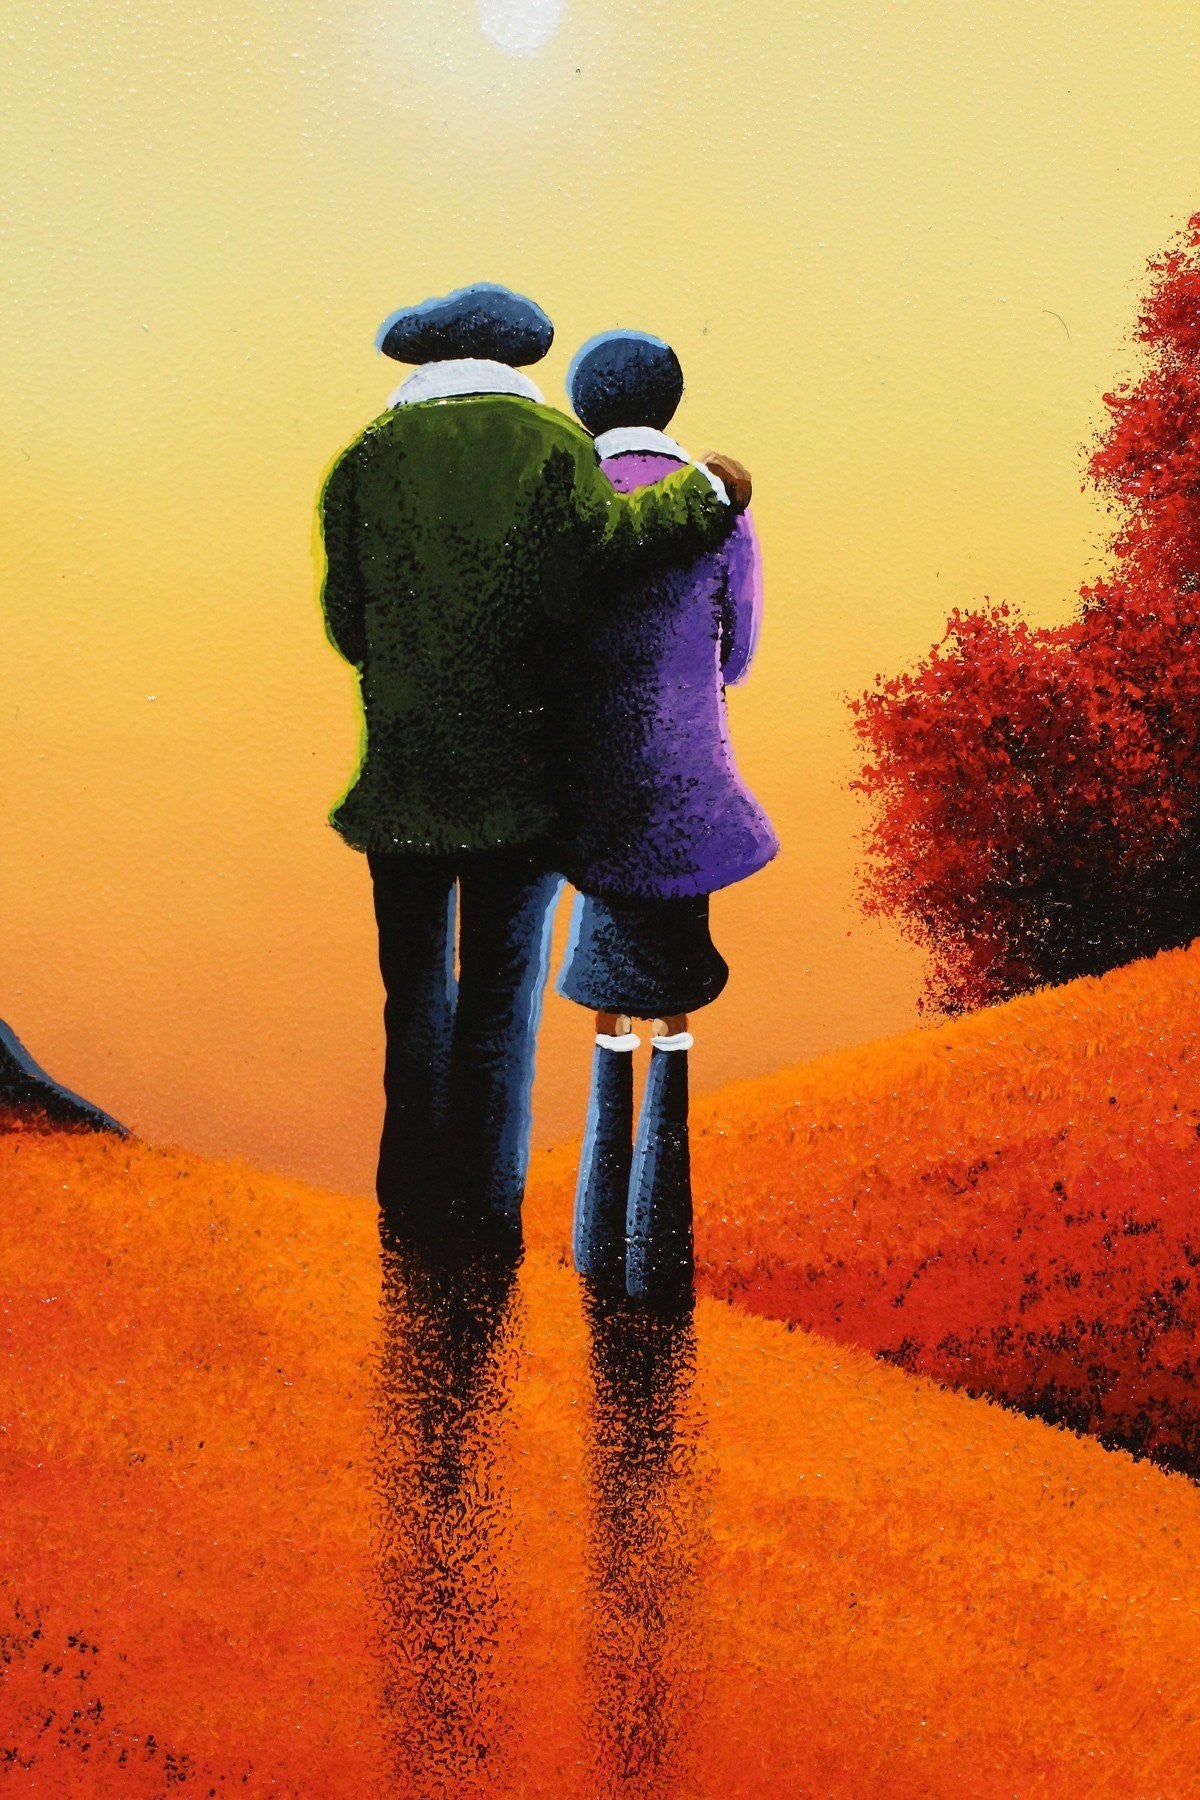 A Walk Into the Sunset - SOLD David Renshaw